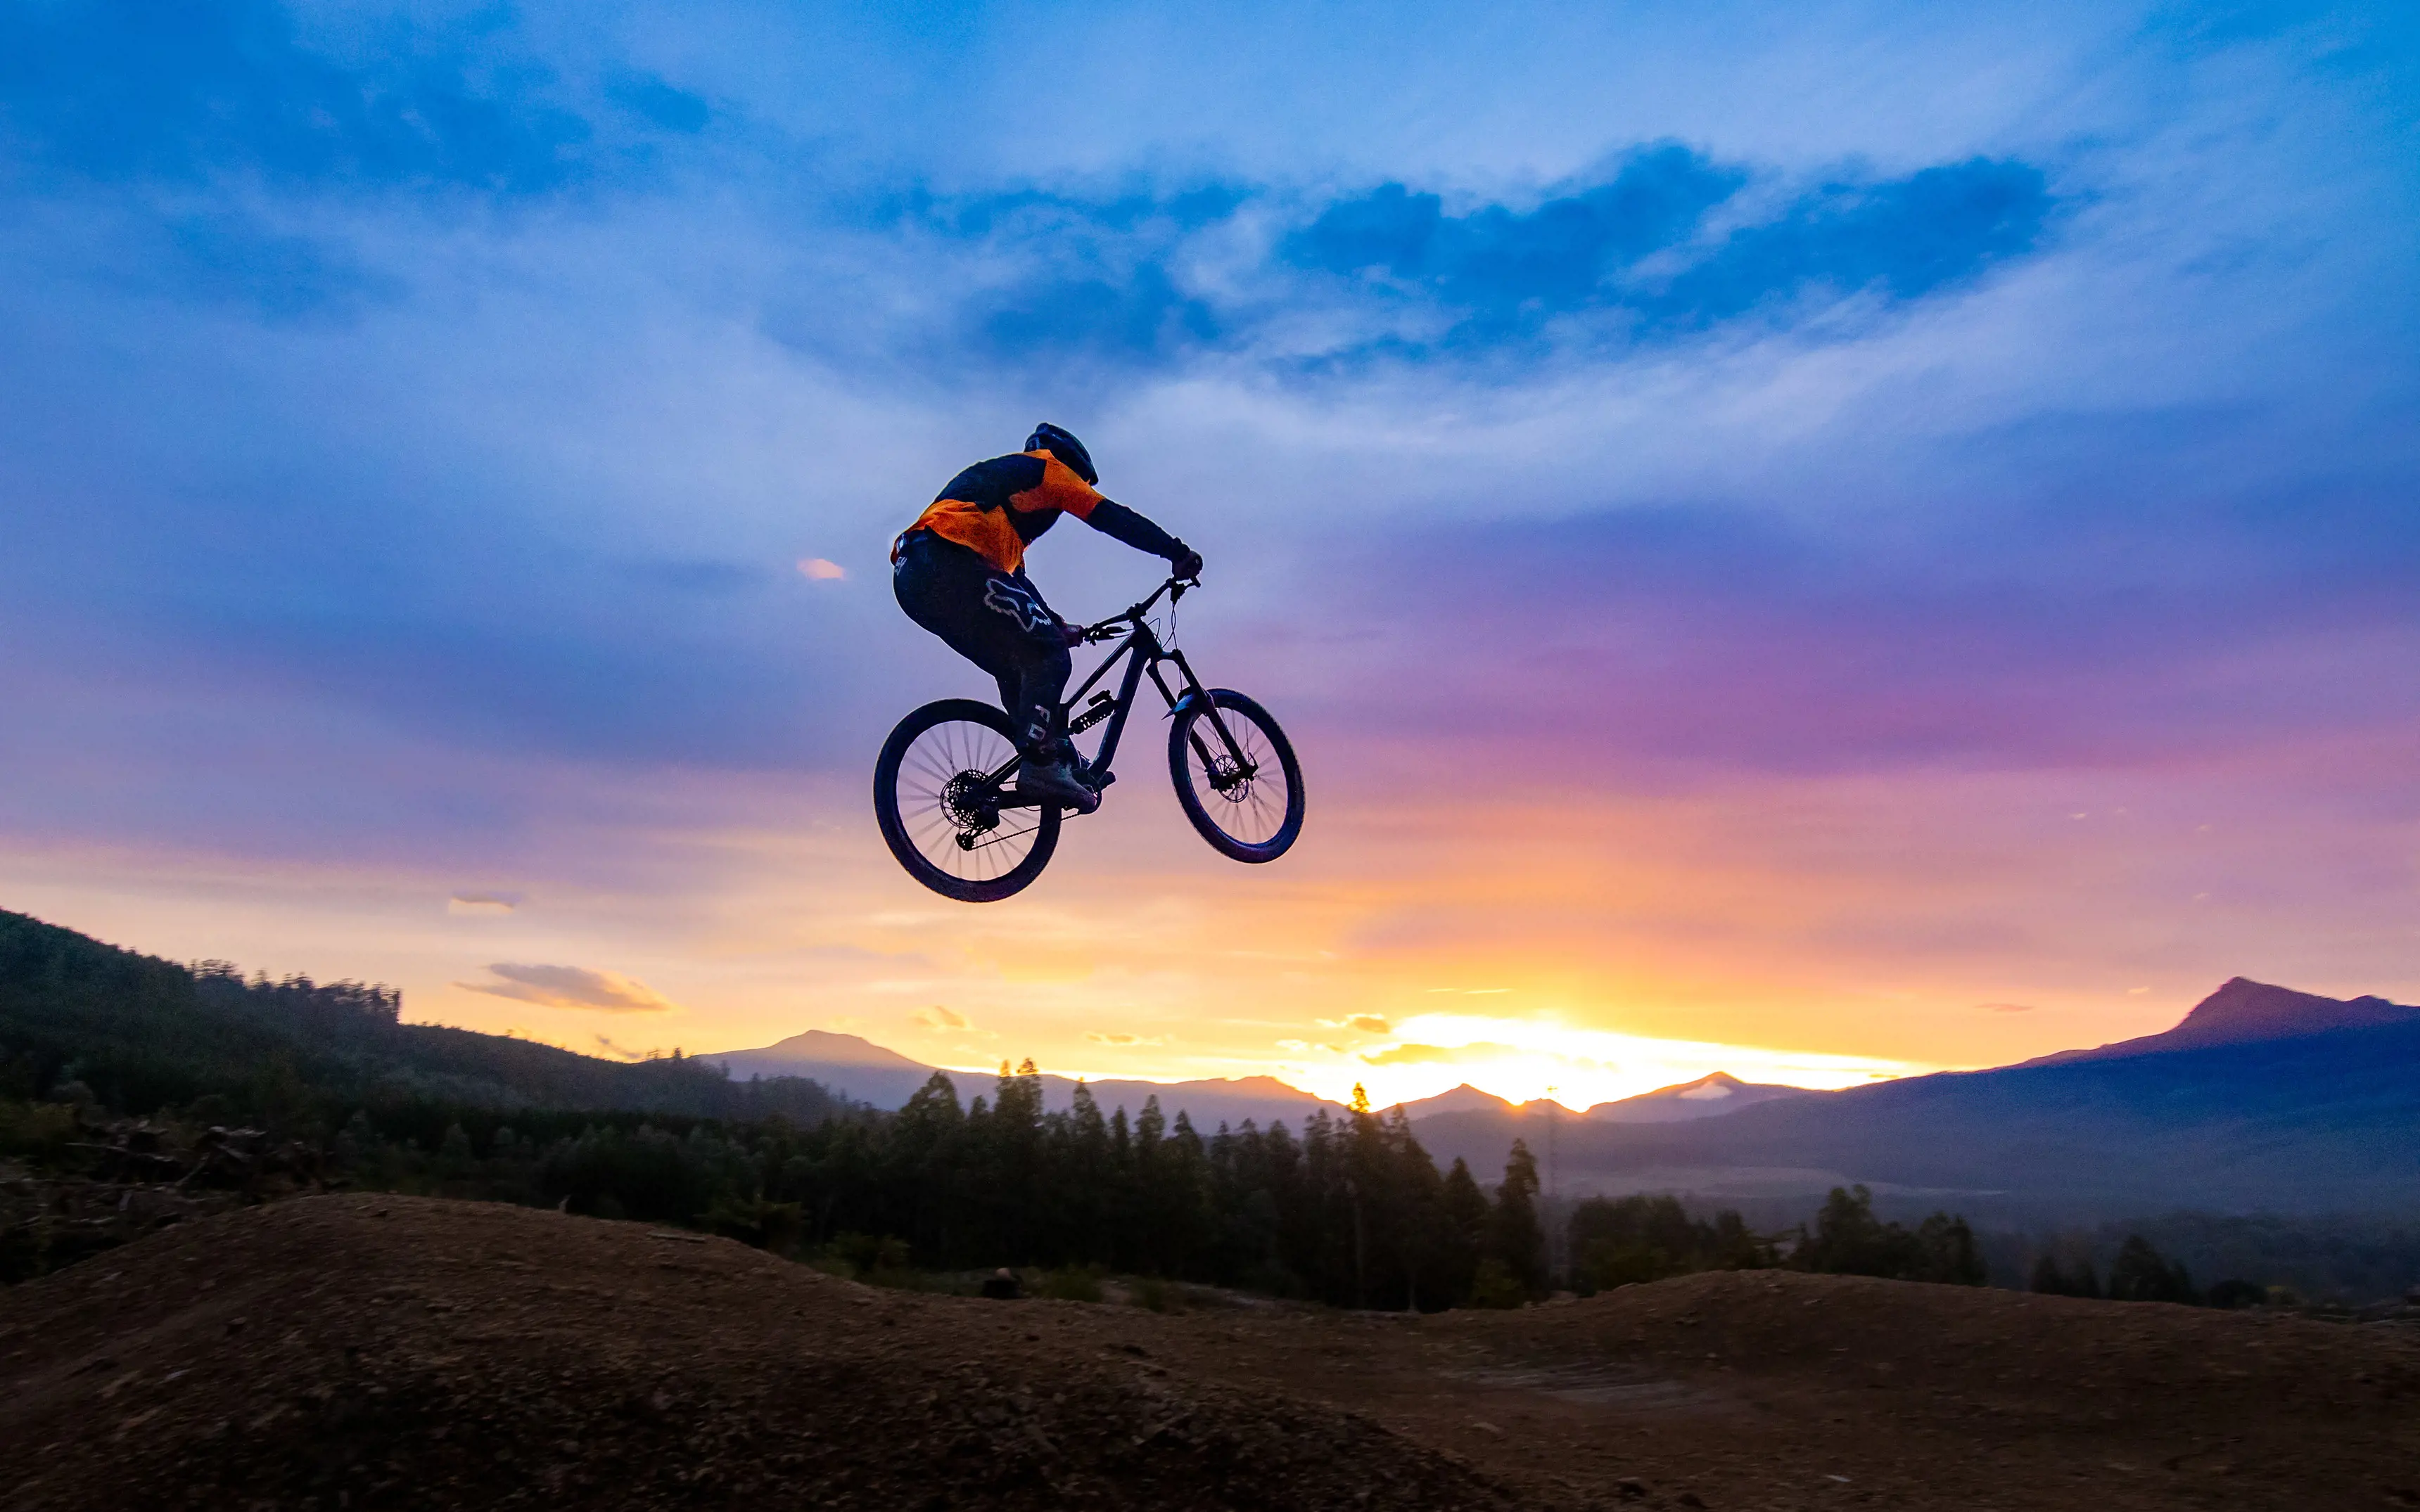 Cyclist in the air at Maydena Bike Park, with pink skies in the backdrop